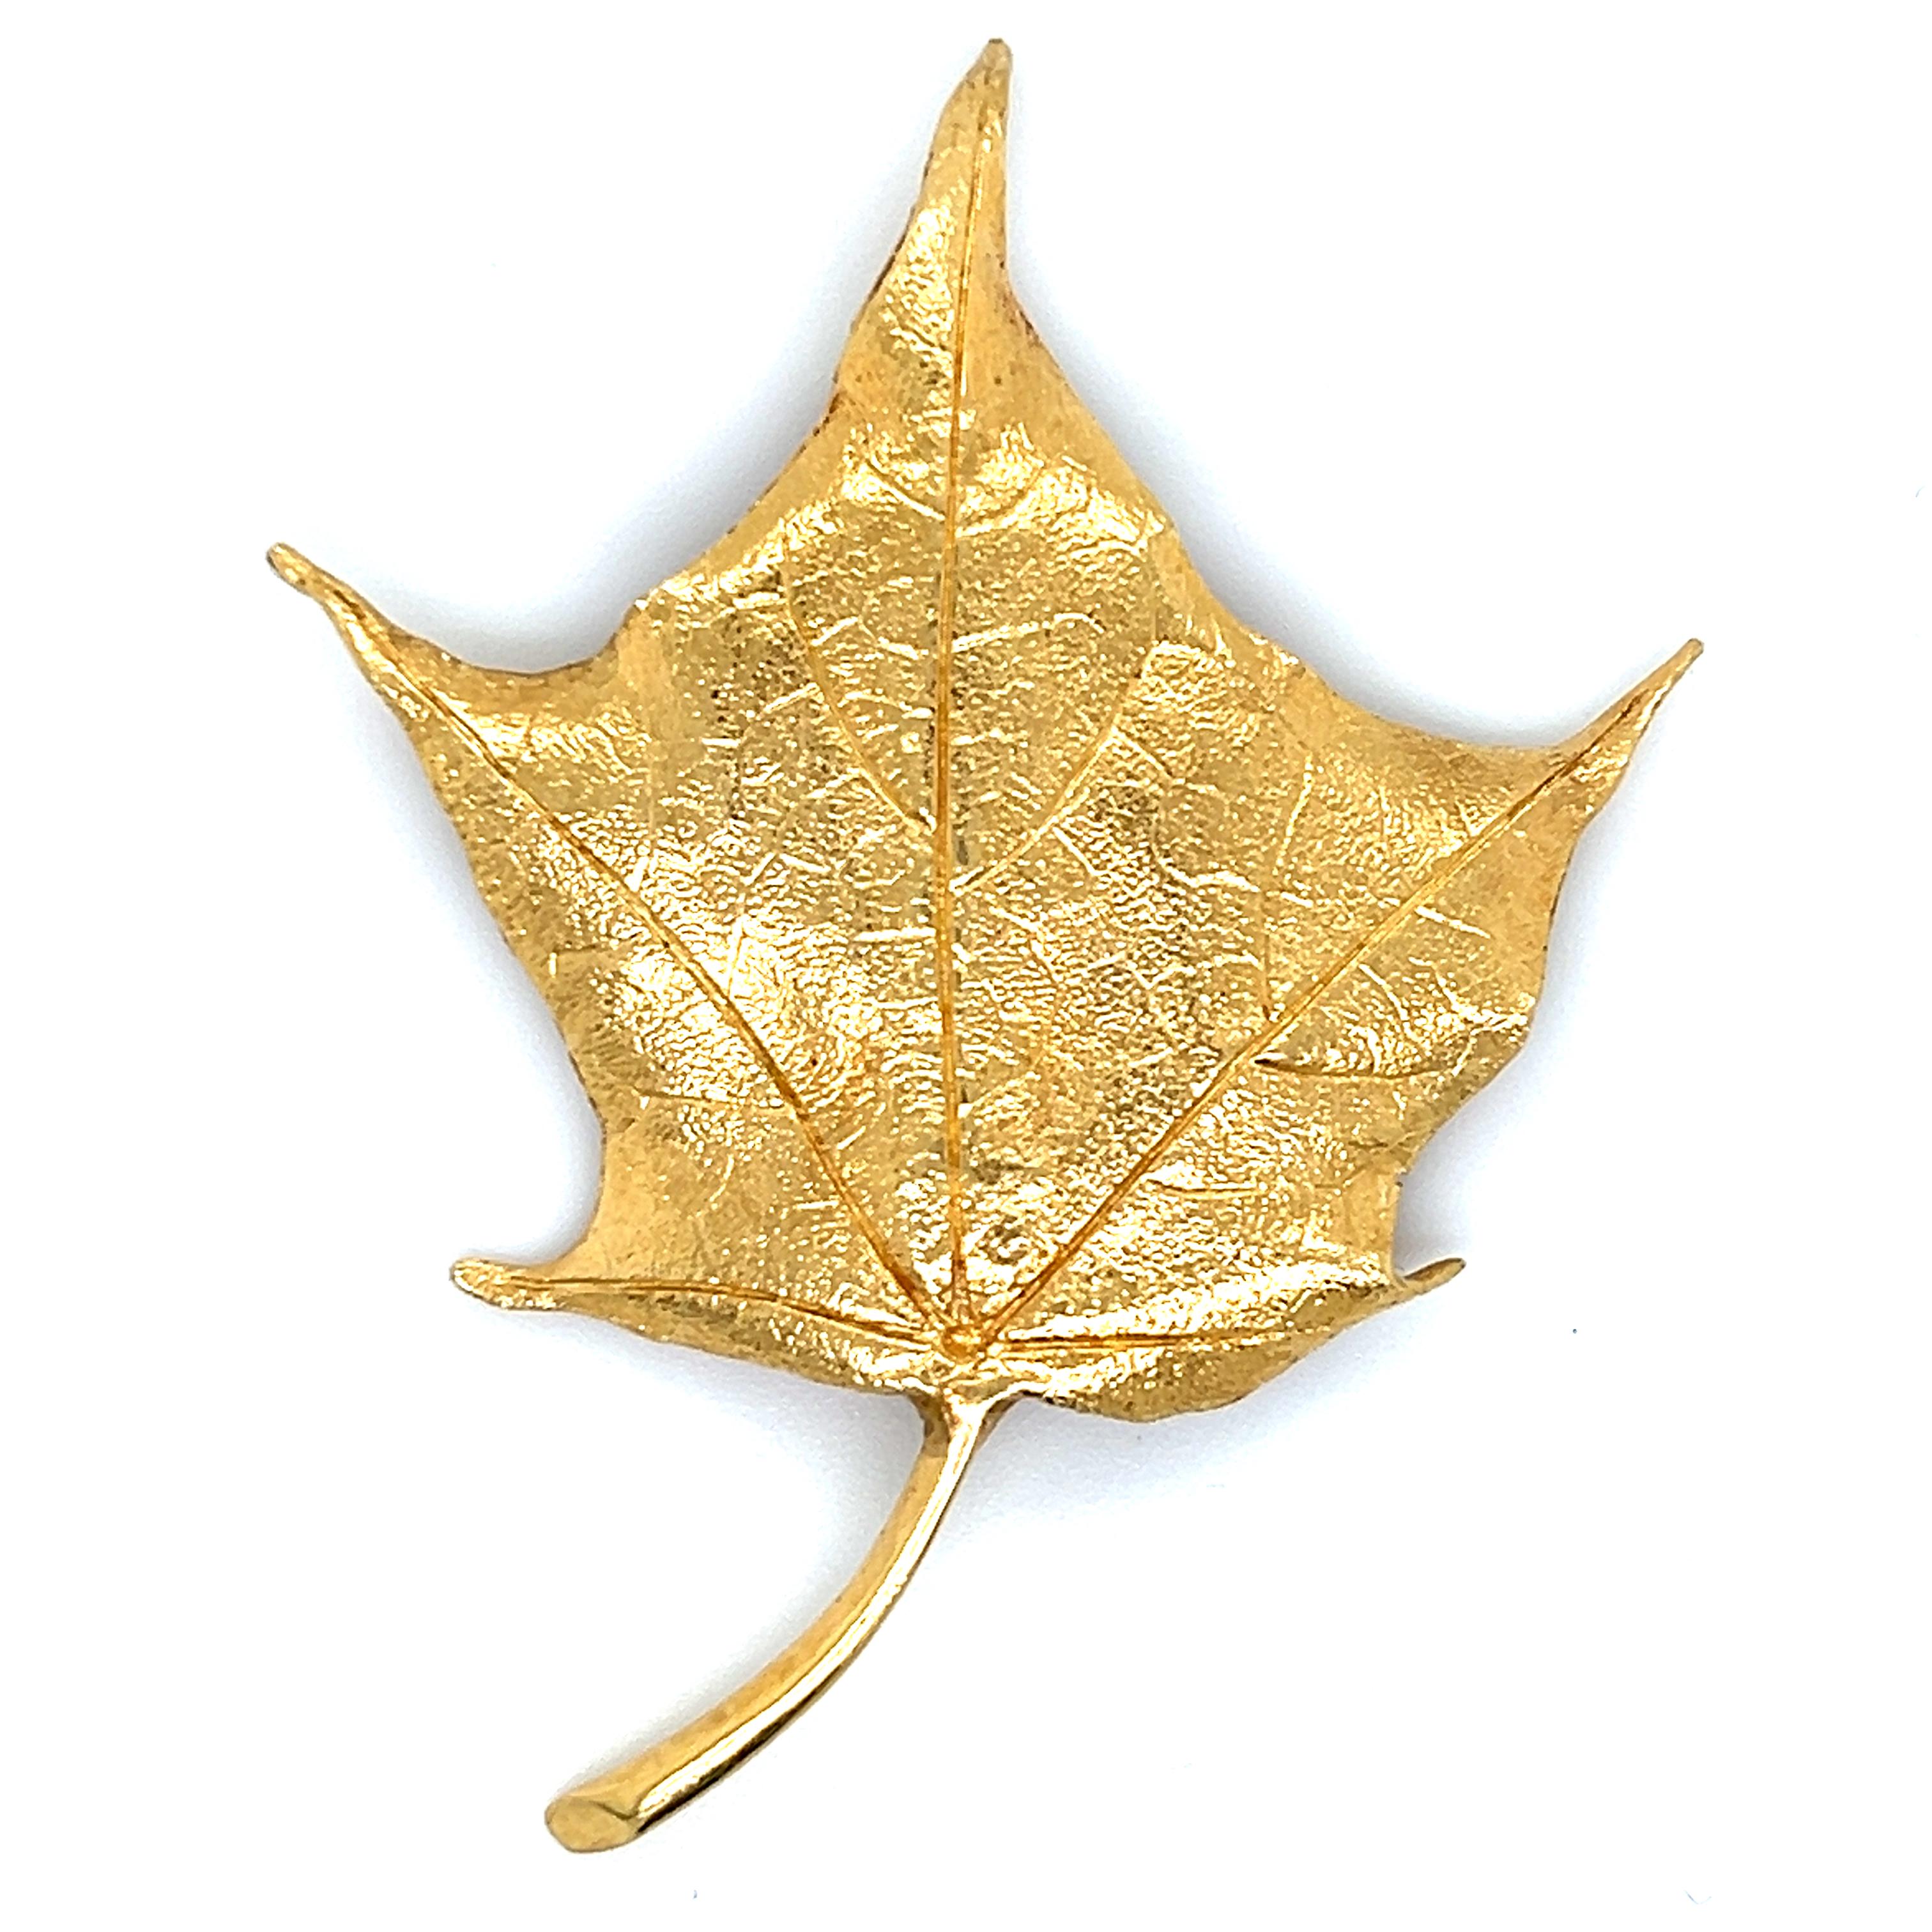 Beautiful design by famed designer Tiffany & Co. The brooch is crafted in 14k yellow gold and shows exquisite detail. Simple & elegant the brooch depicts a golden maple leaf and is sure to be complimented whenever worn. The brooch measures 2.25